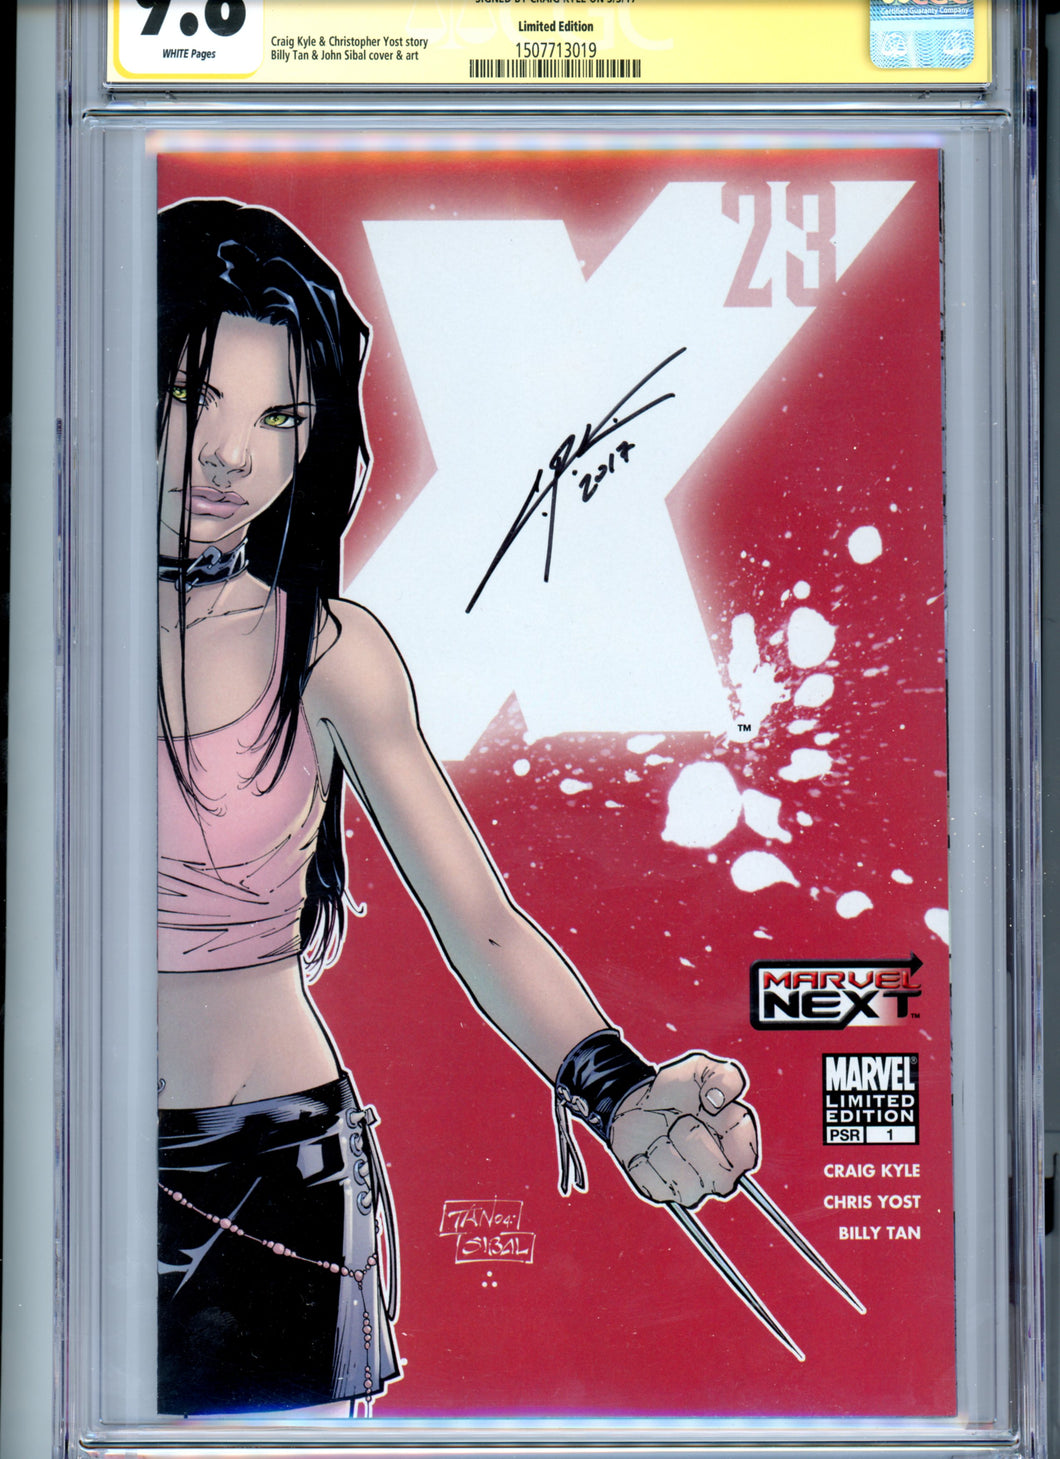 X-23 #1 - CGC 9.8 - Variant Cover (Limited Edition) - Signed by Craig Kyle